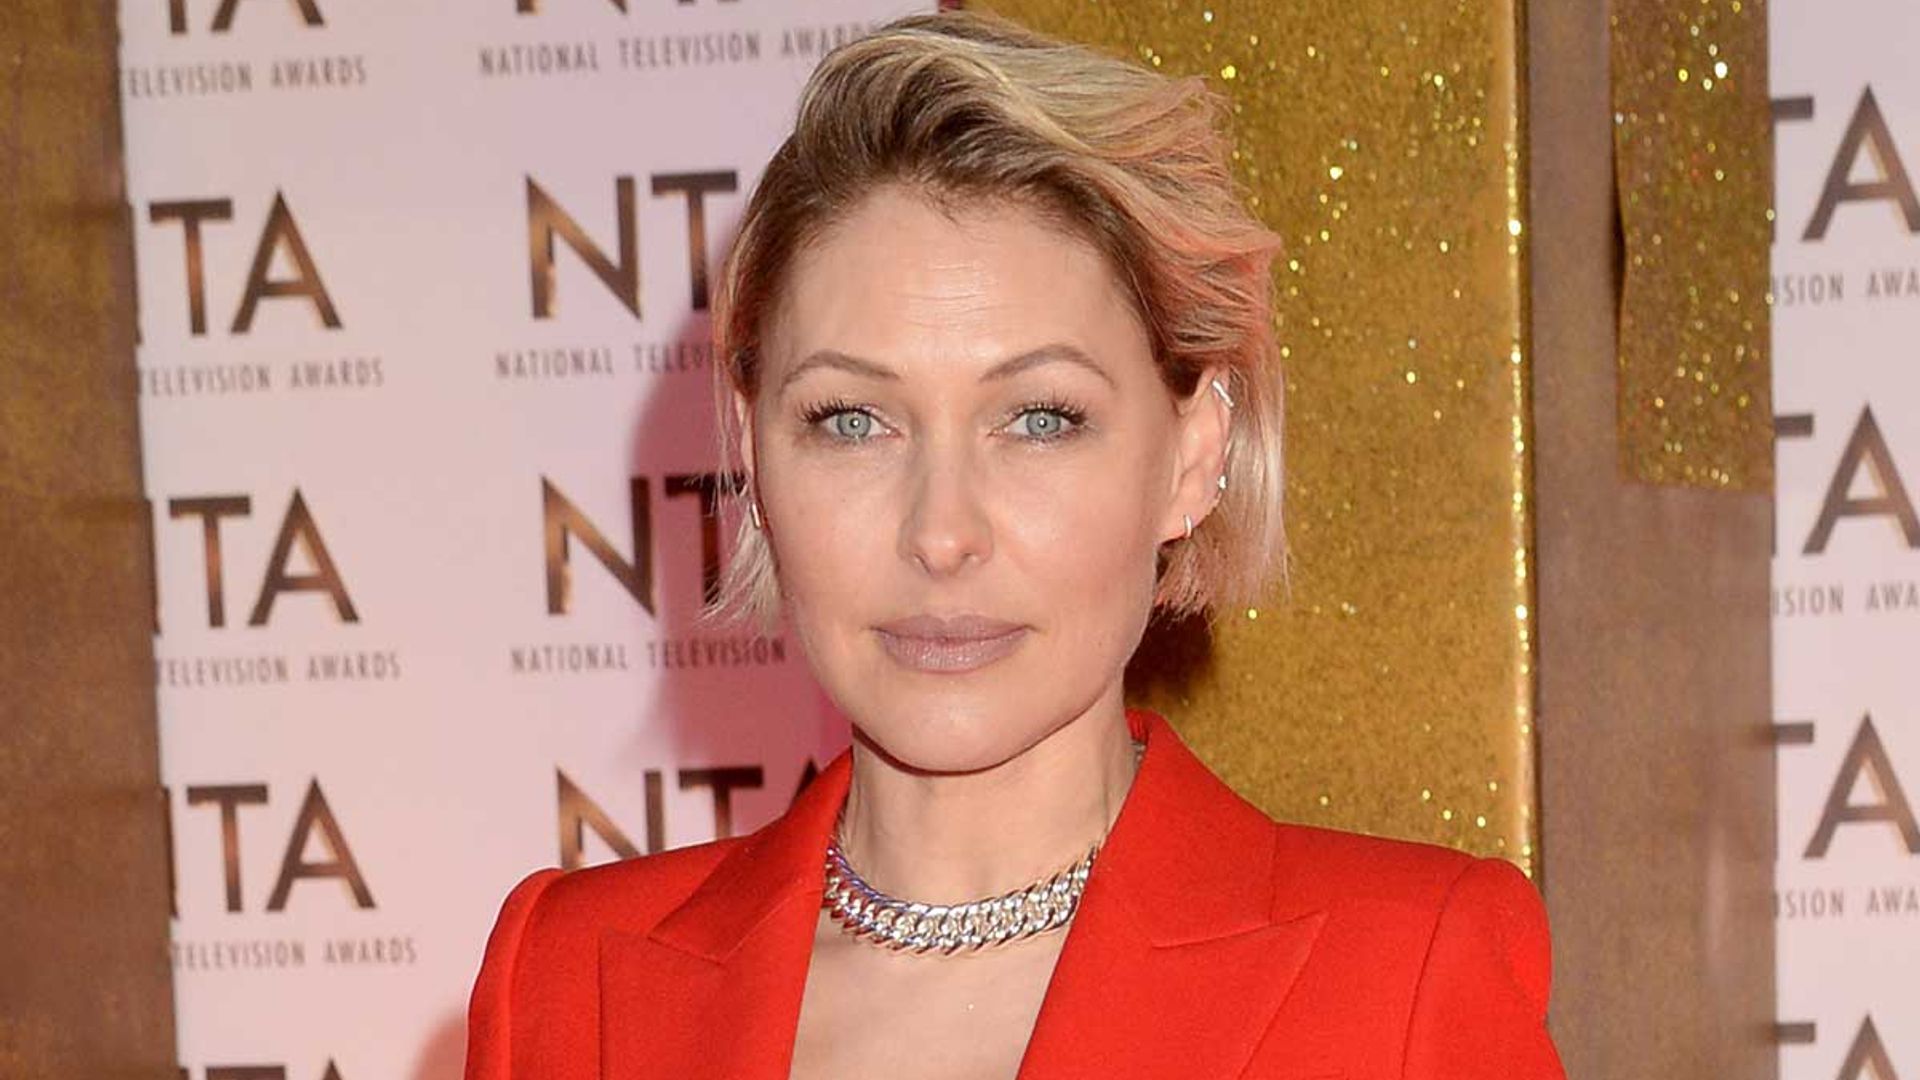 Emma Willis joins good cause after witnessing the effects breast cancer has on loved ones